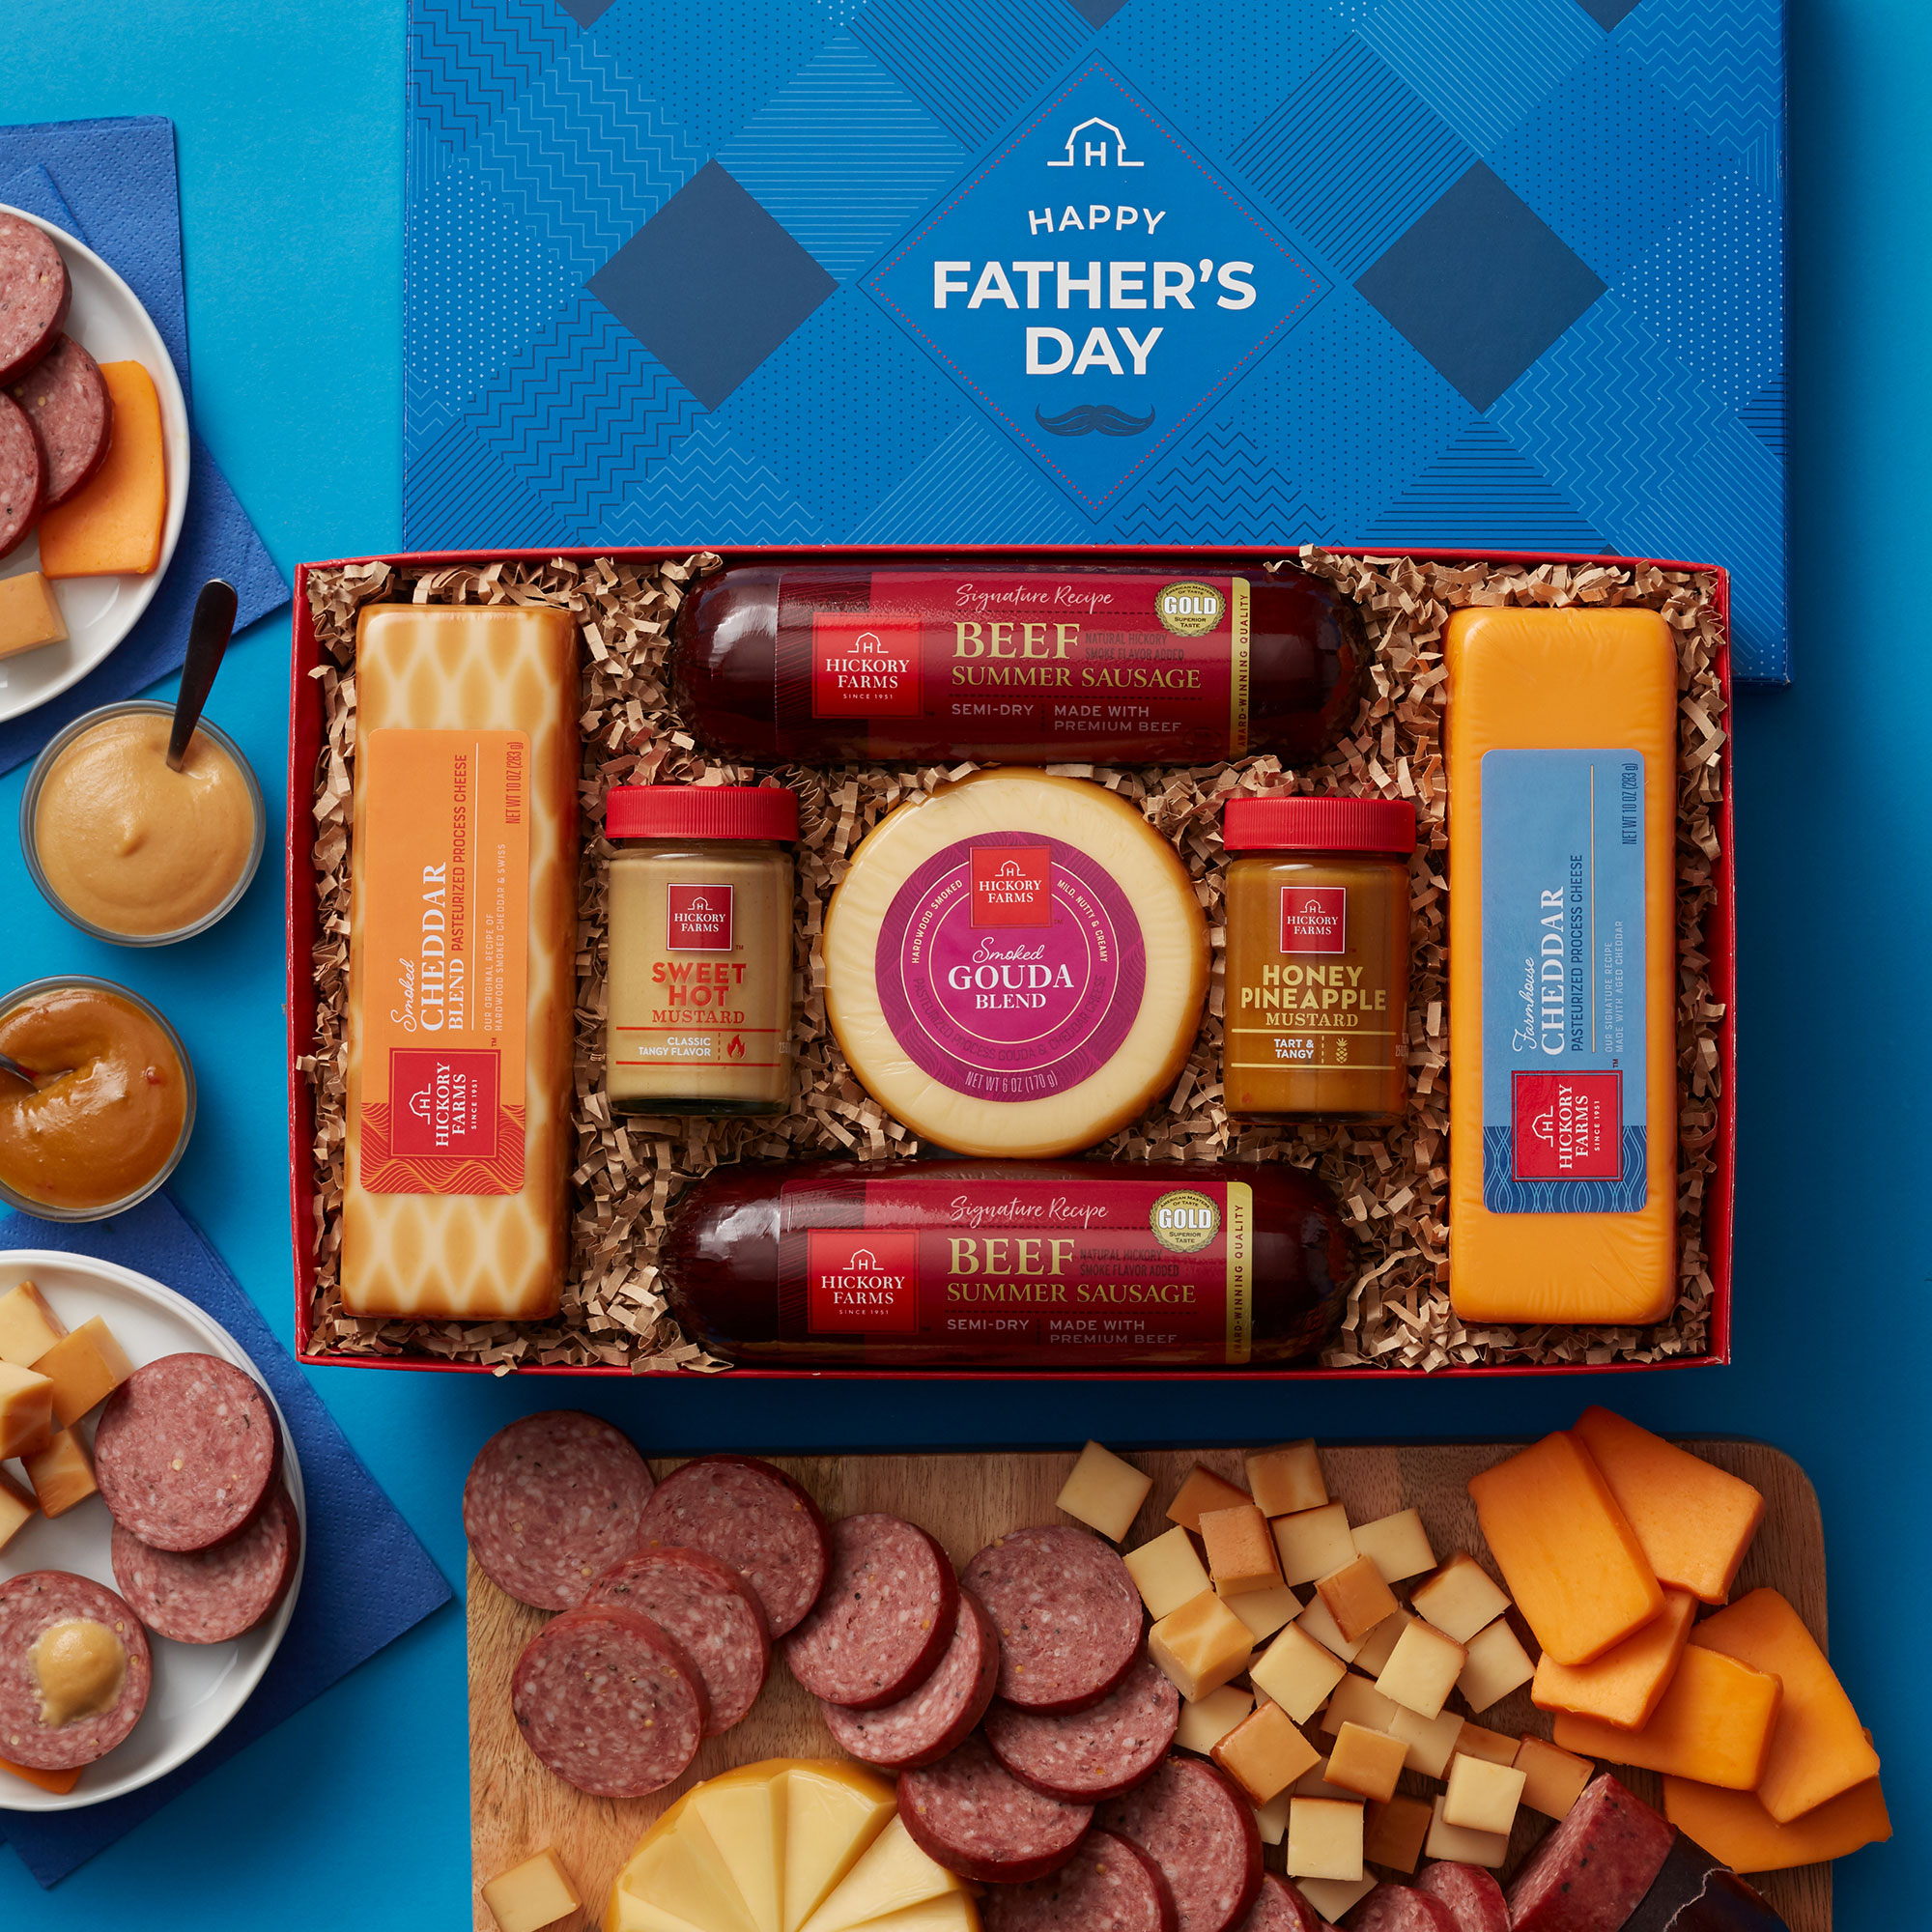 https://www.hickoryfarms.com/on/demandware.static/-/Sites-Web-Master-Catalog/default/dwc7302be0/images/products/fathers-day-summer-sausage-cheese-gift-box-001266-1.jpg